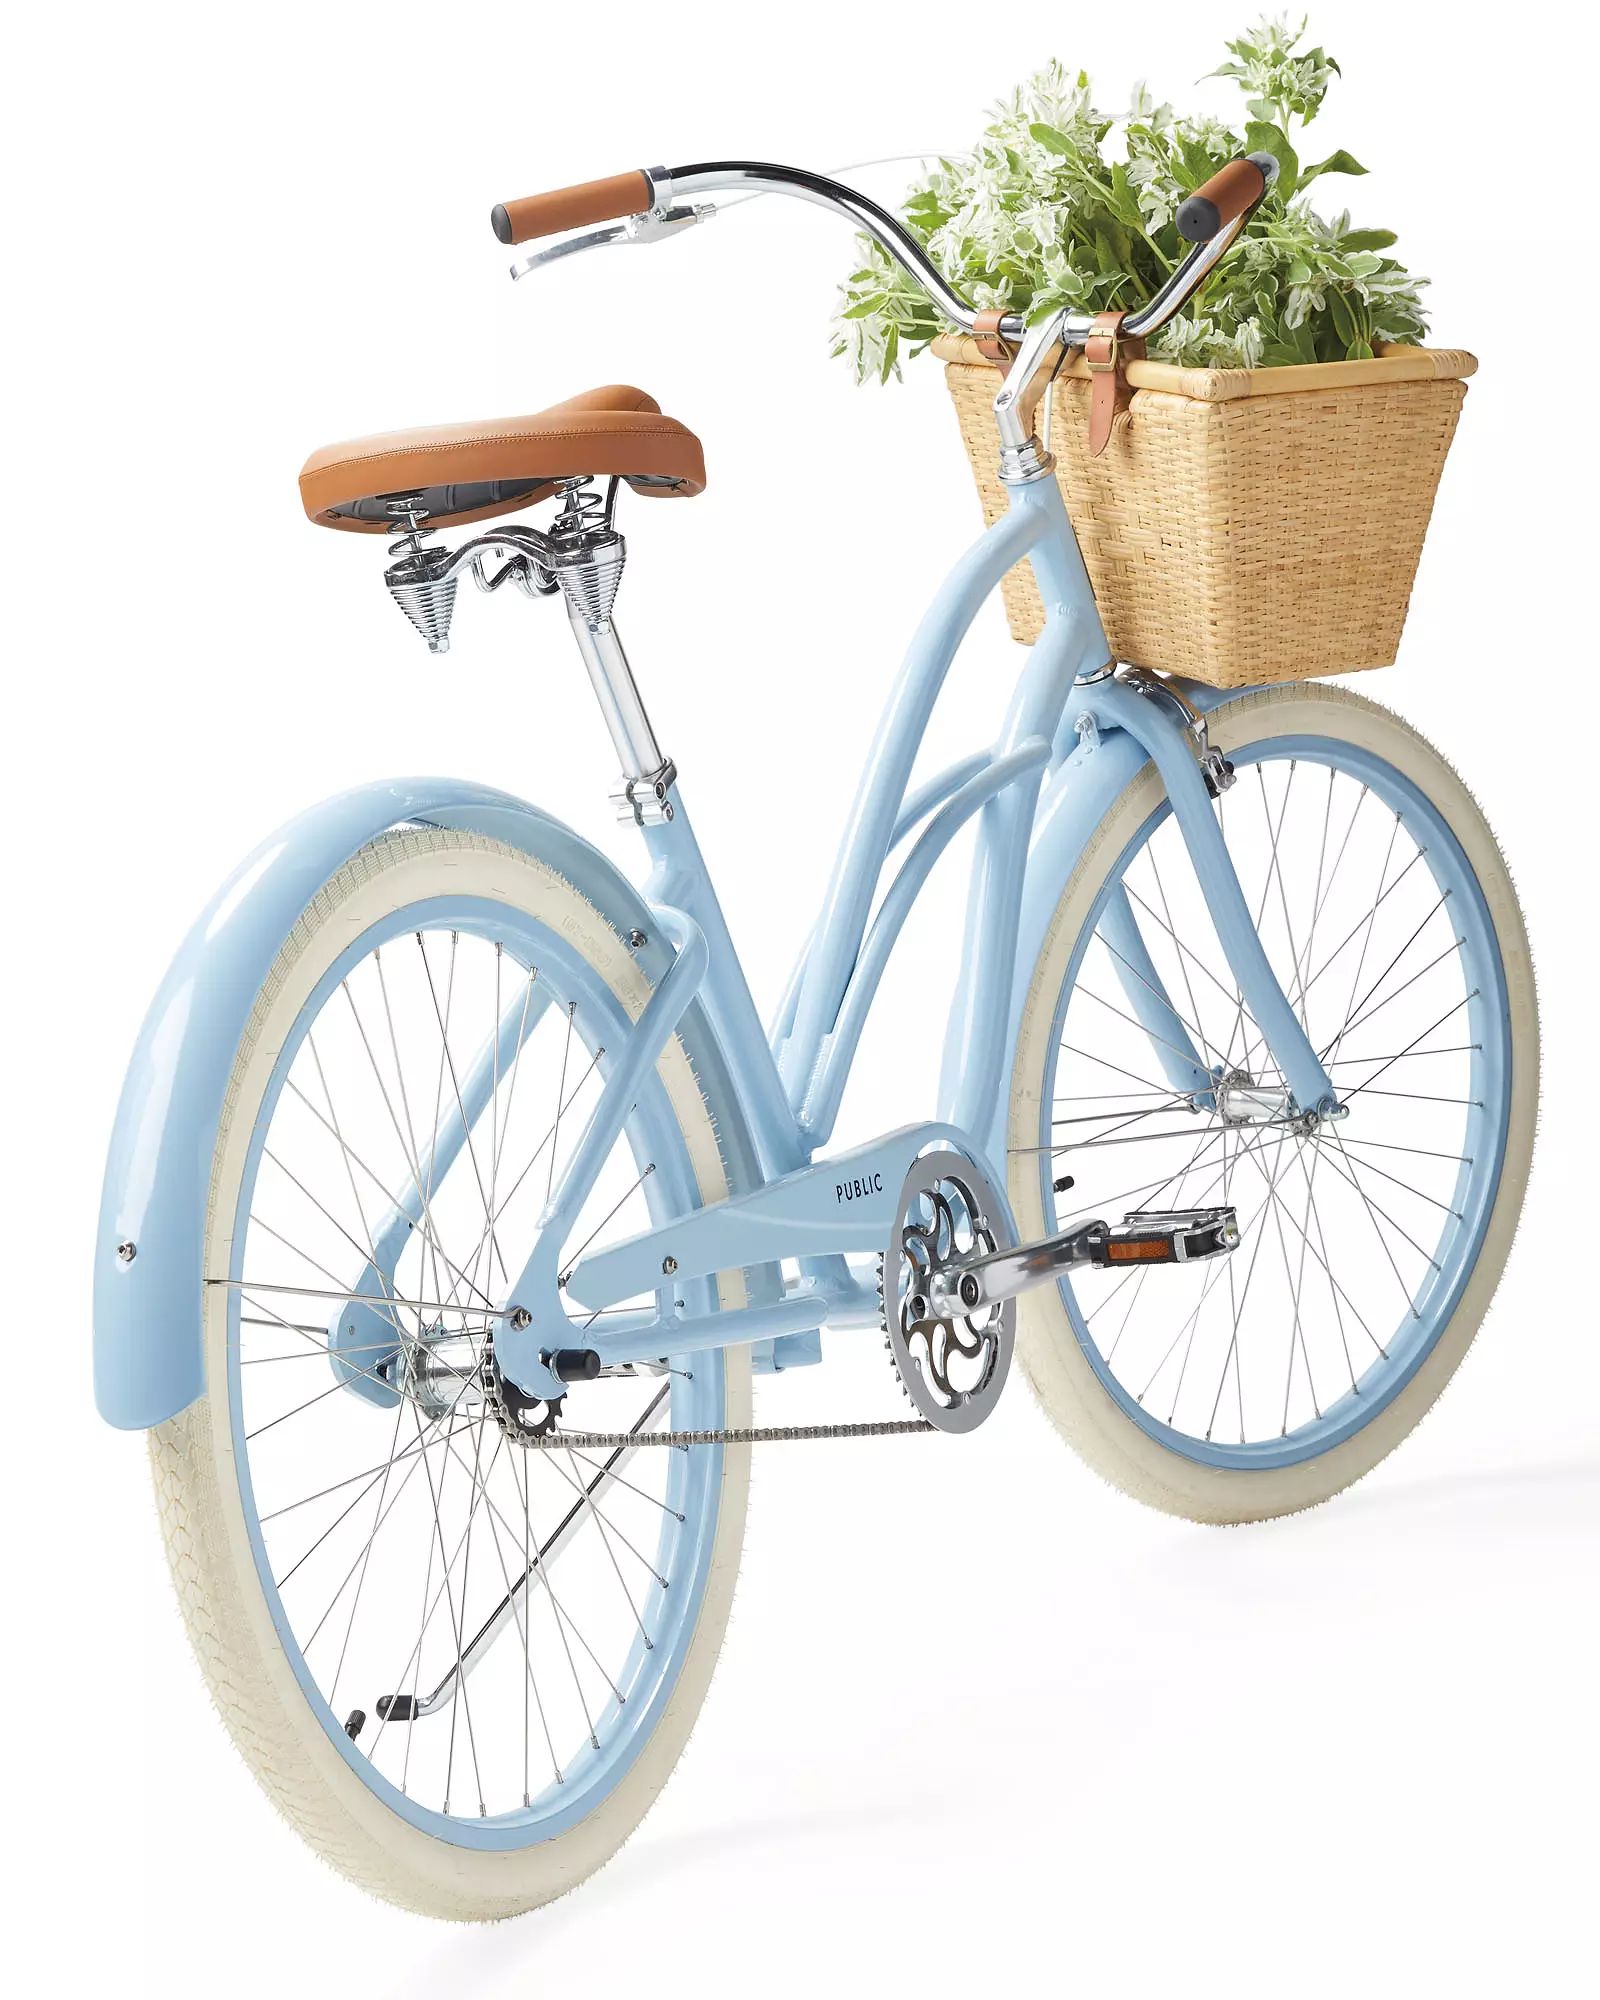 Limited Edition PUBLIC® Beach Cruiser Bike | Serena and Lily